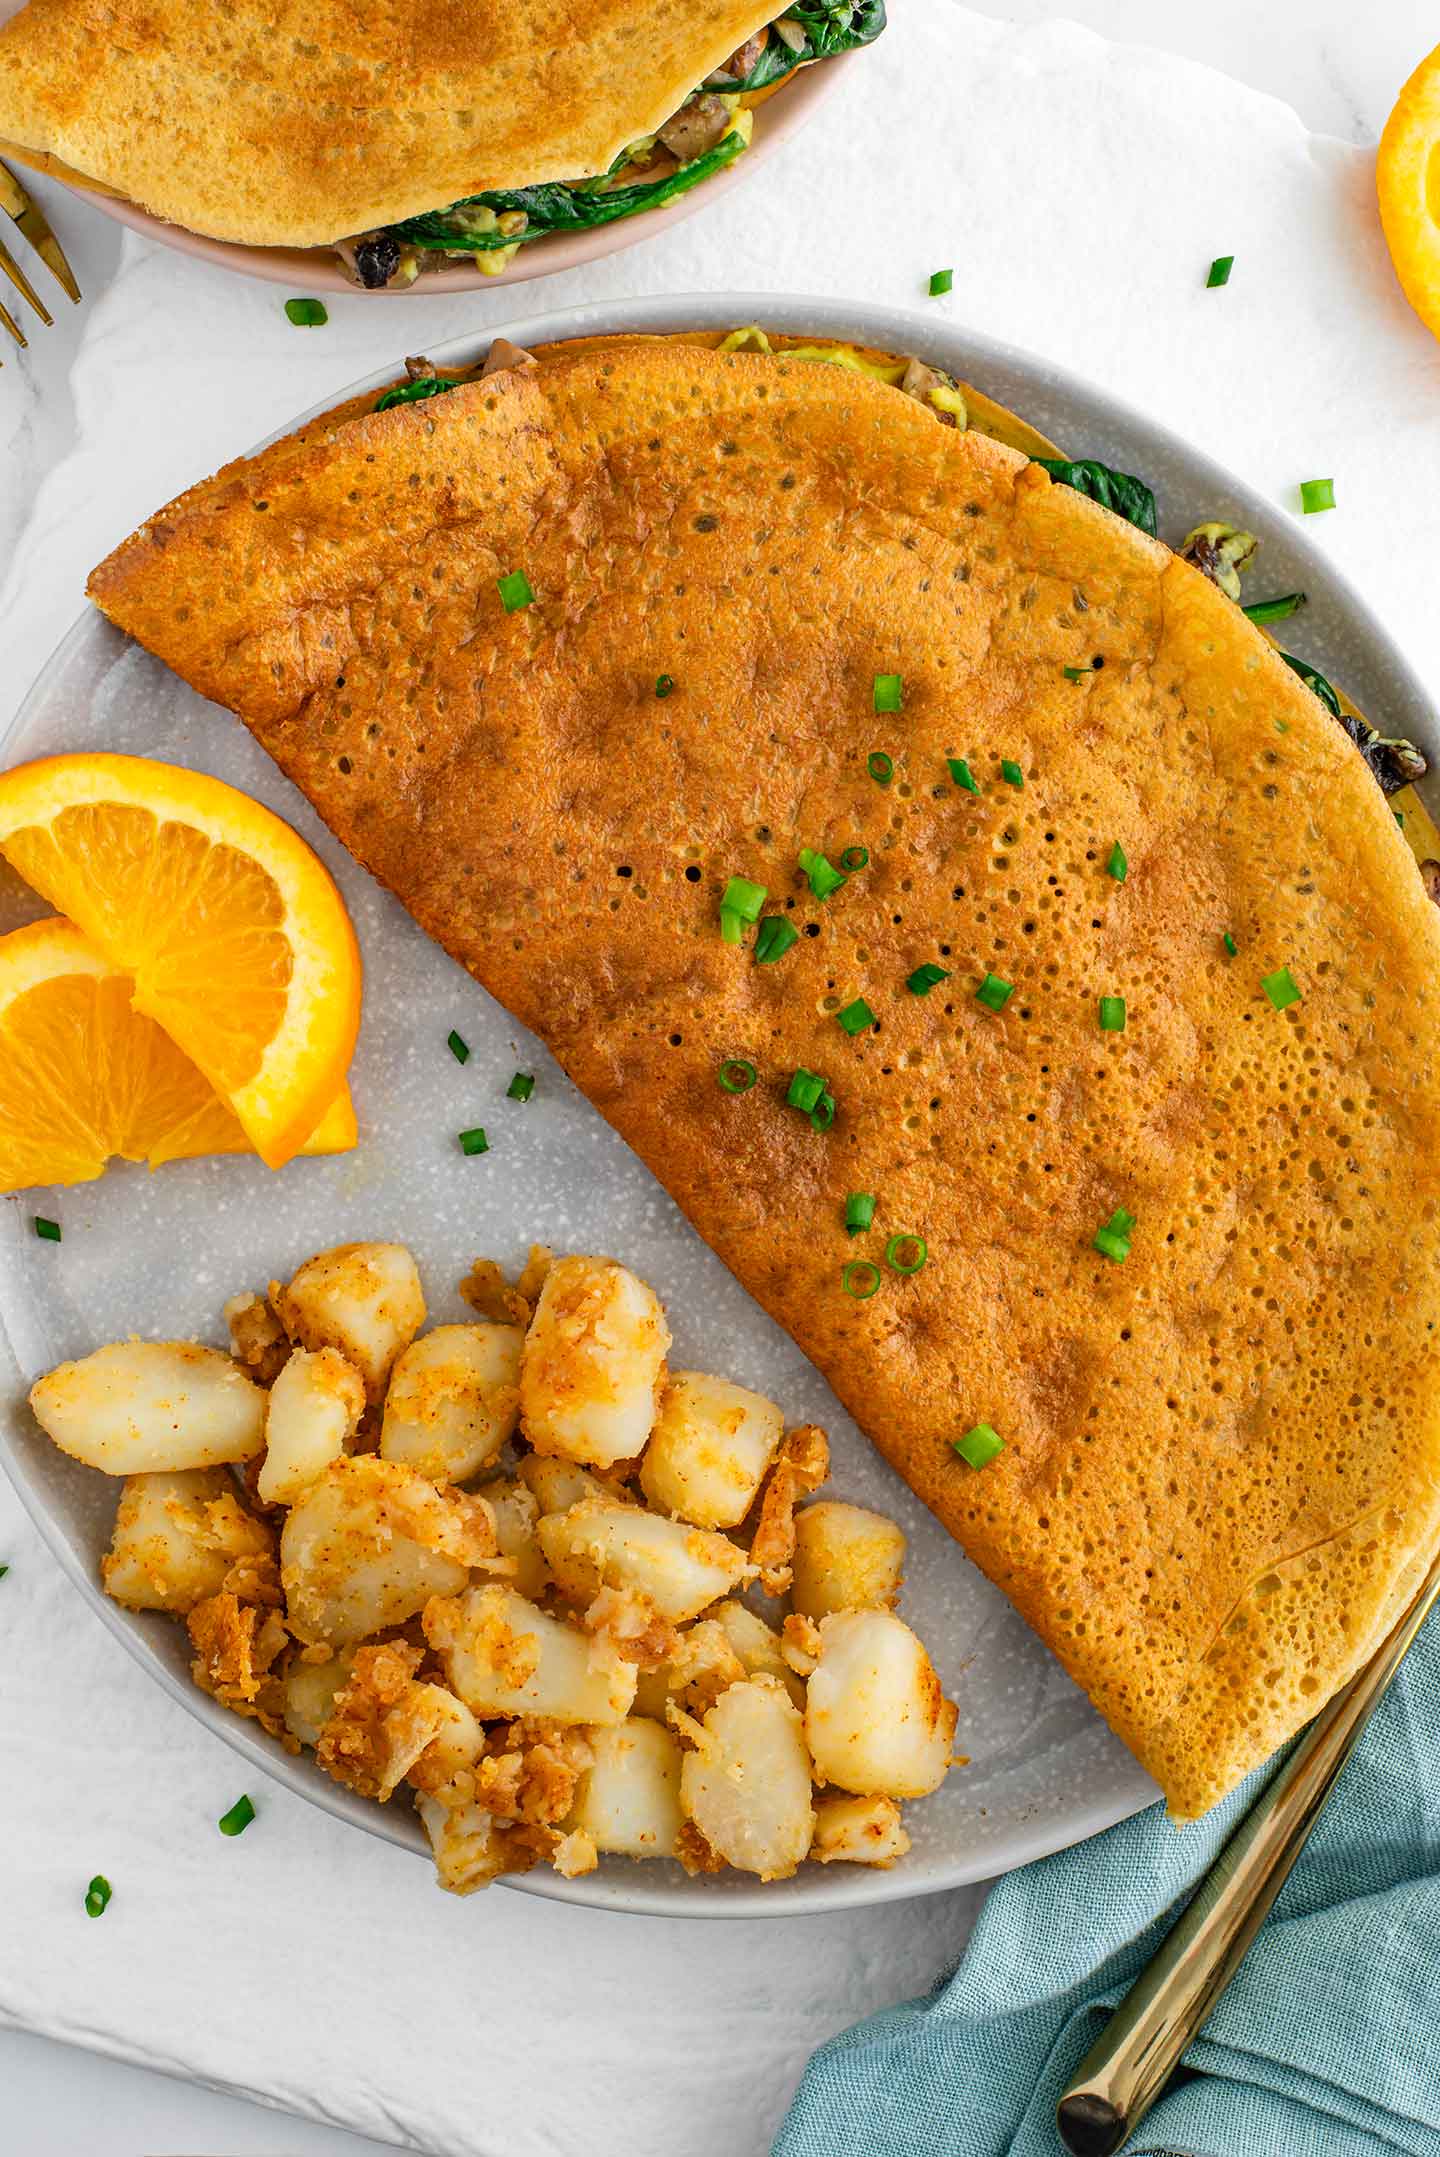 Top down view of a golden vegan omelette made from chickpea flour. The fillings peak out from the side and chives garnish the top. Home fries and orange slices garnish the plate.